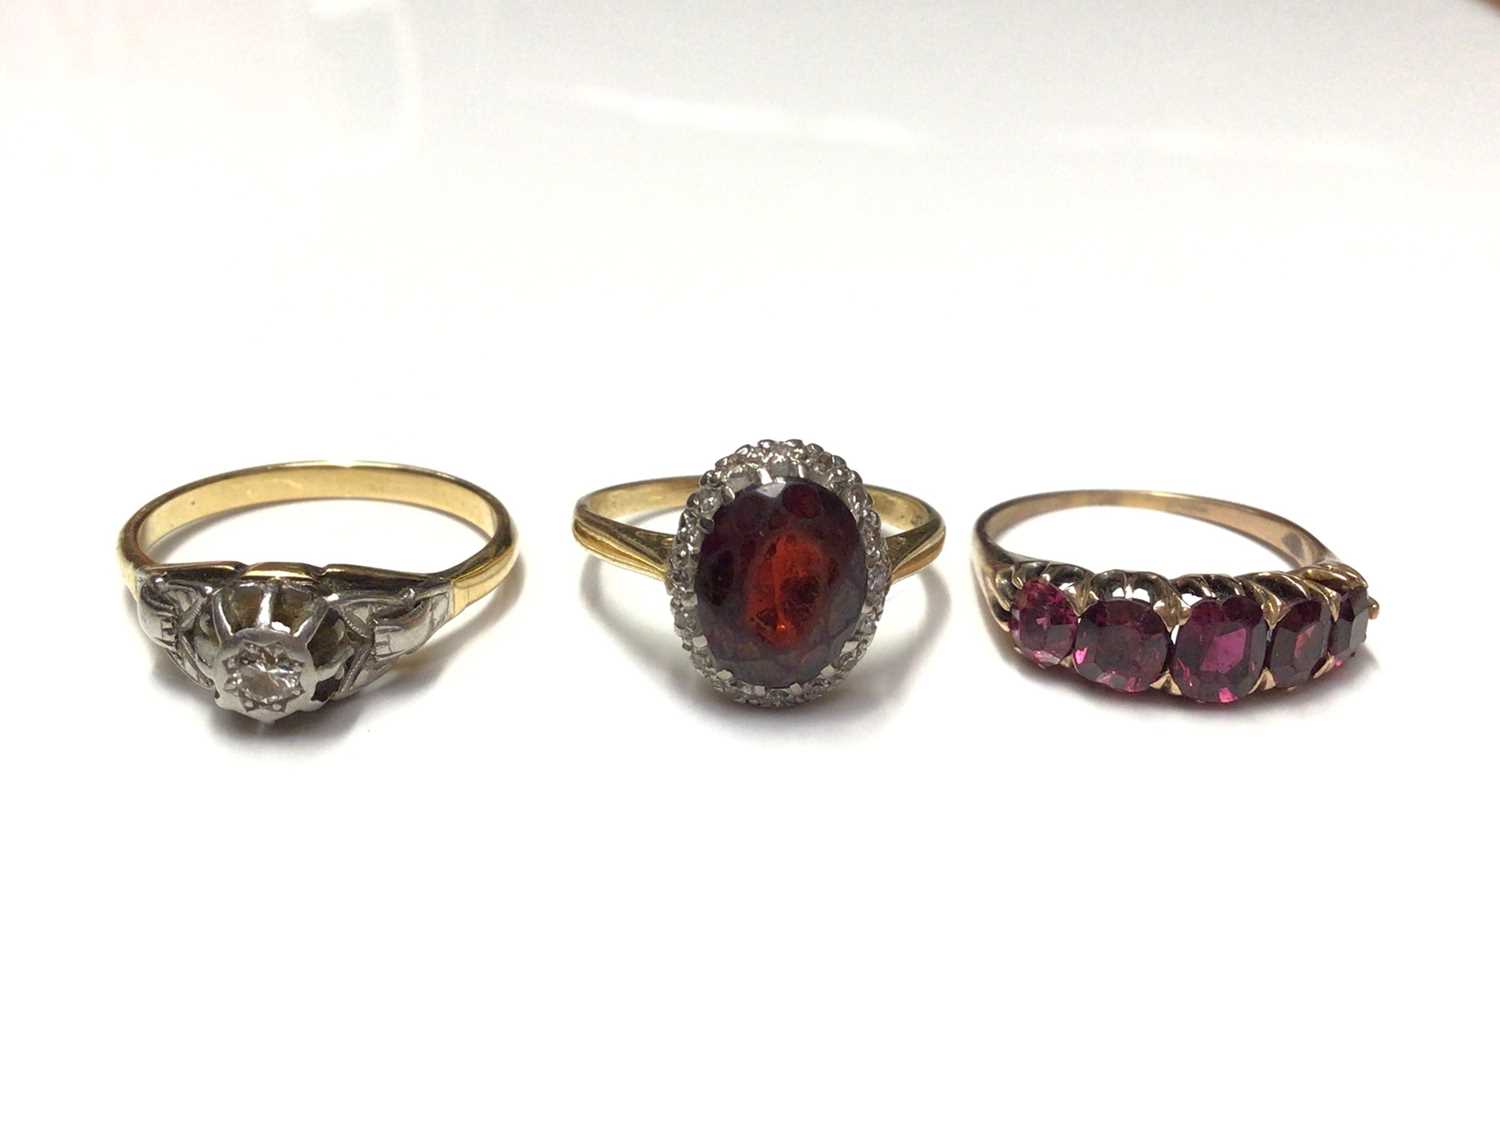 Lot 55 - 18ct gold diamond ring, 18ct gold garnet and diamond cluster ring and Edwardian garnet five stone ring